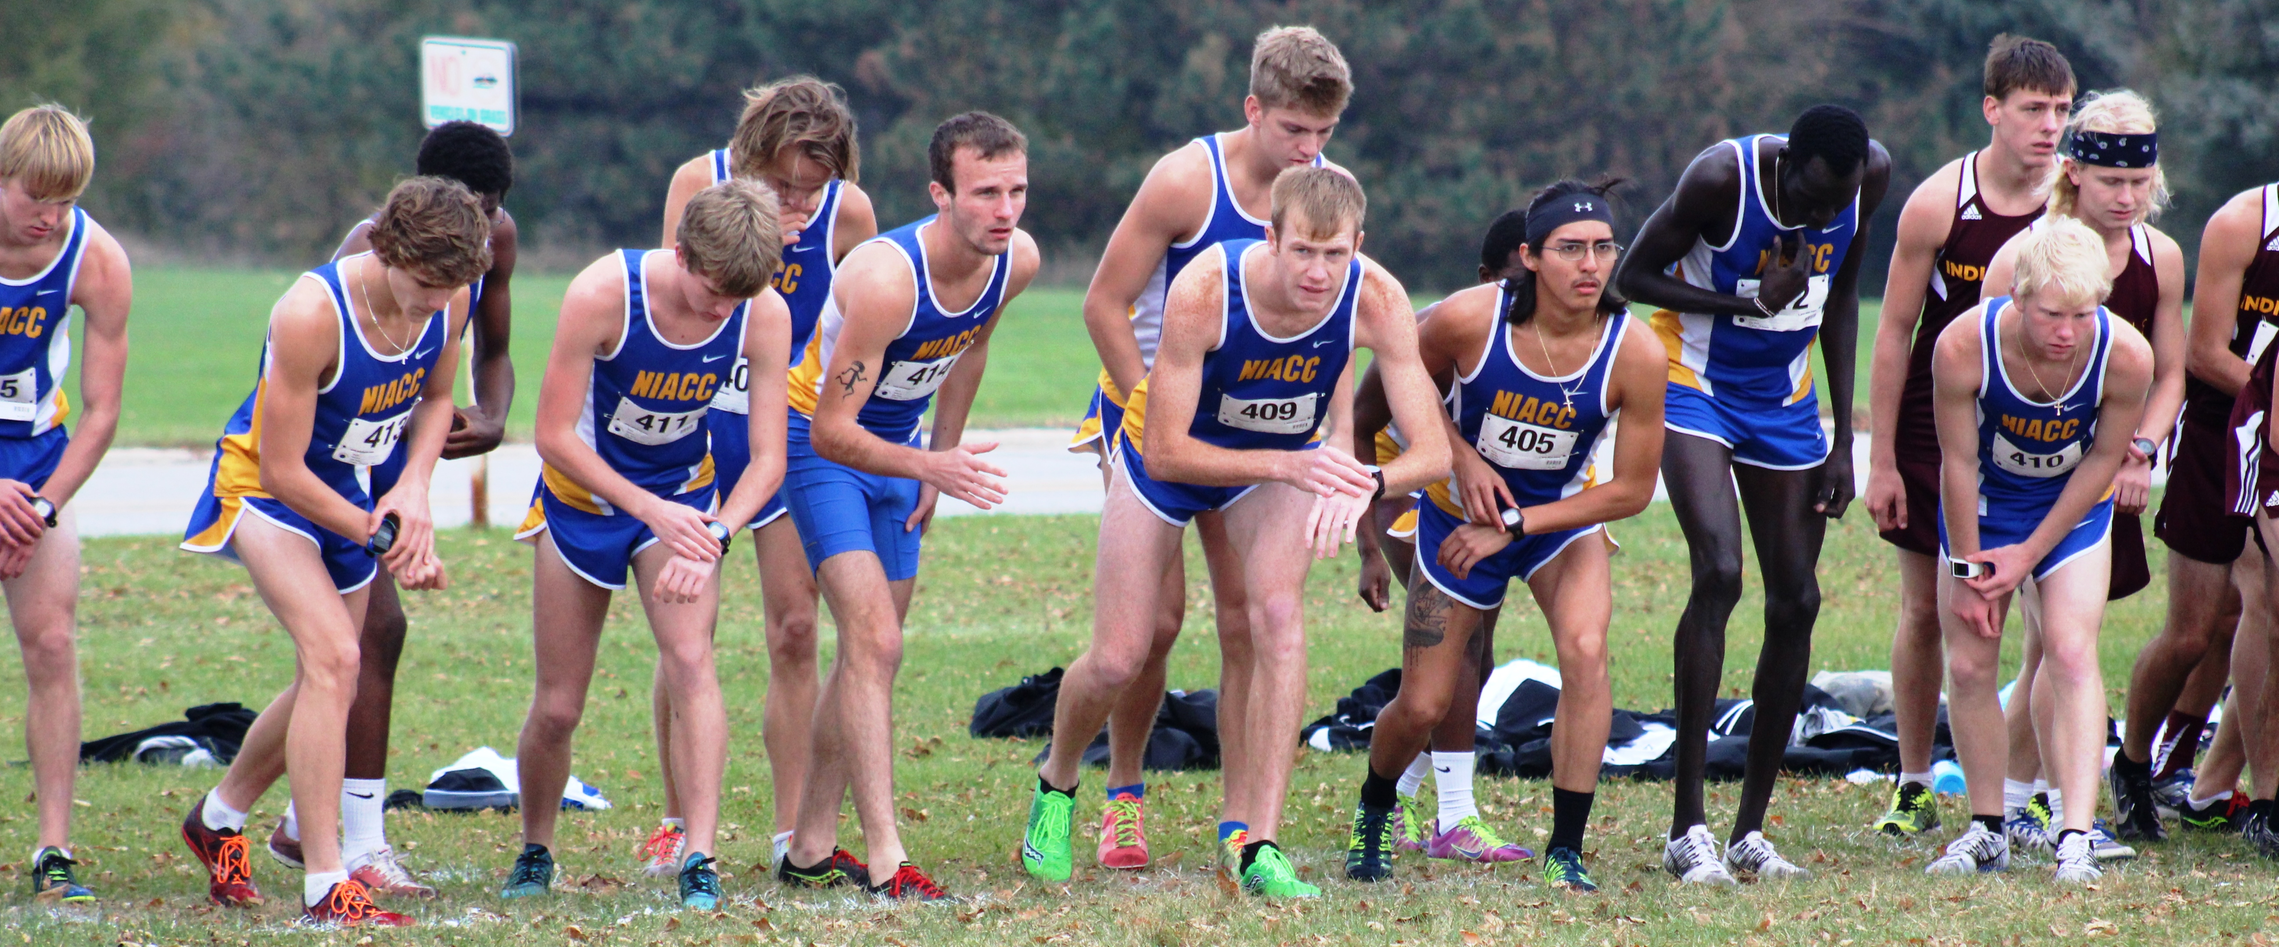 NIACC men ranked 8th, women ranked 21st heading into nationals